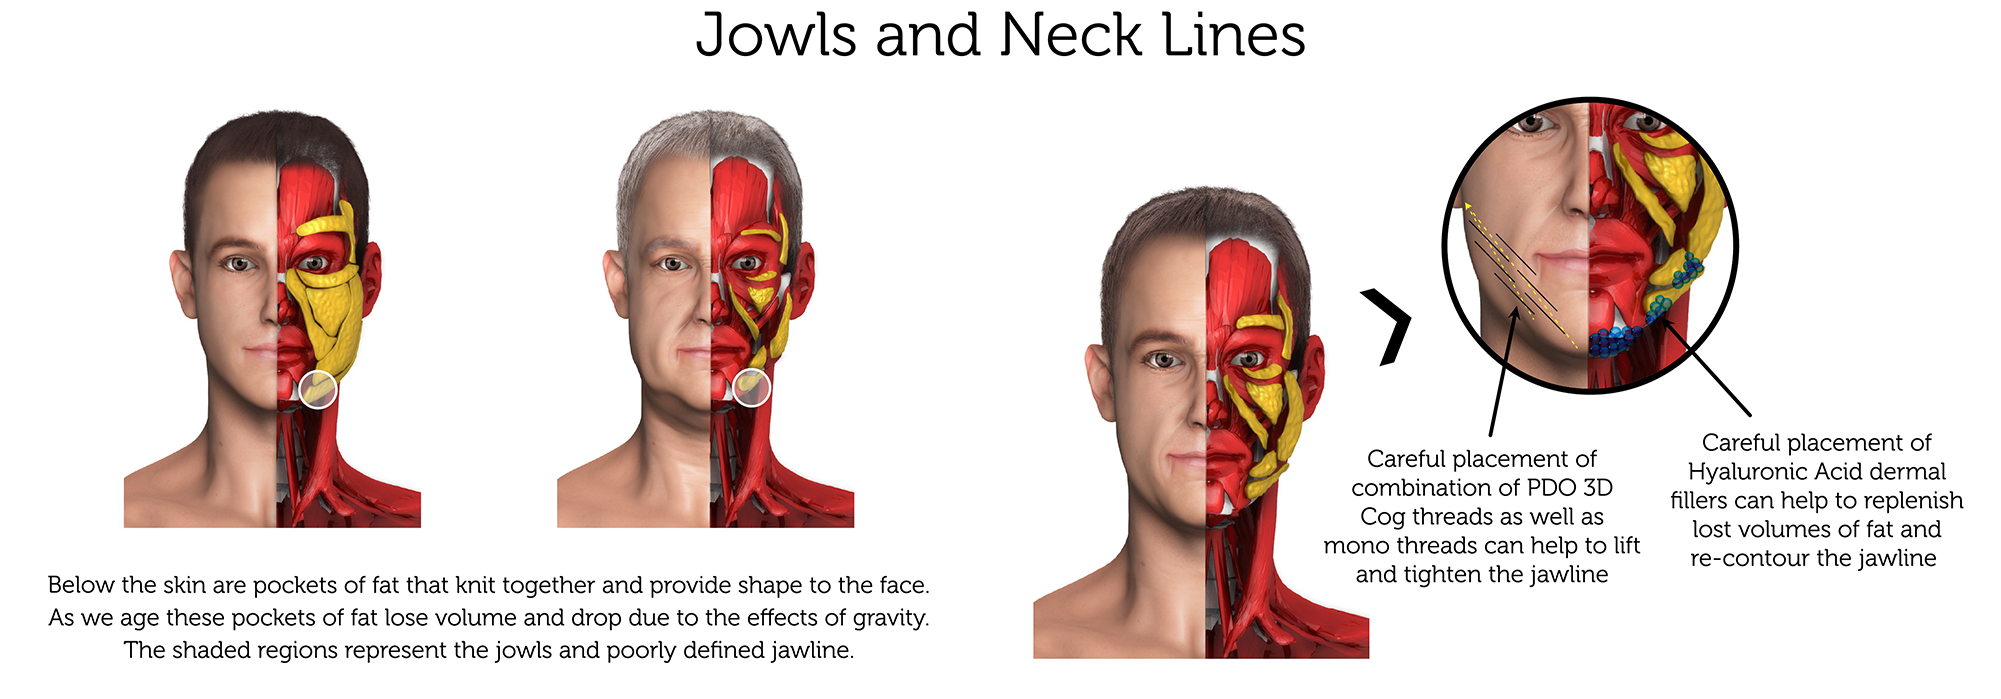 Jowls and Neck Lines (Male) a-01